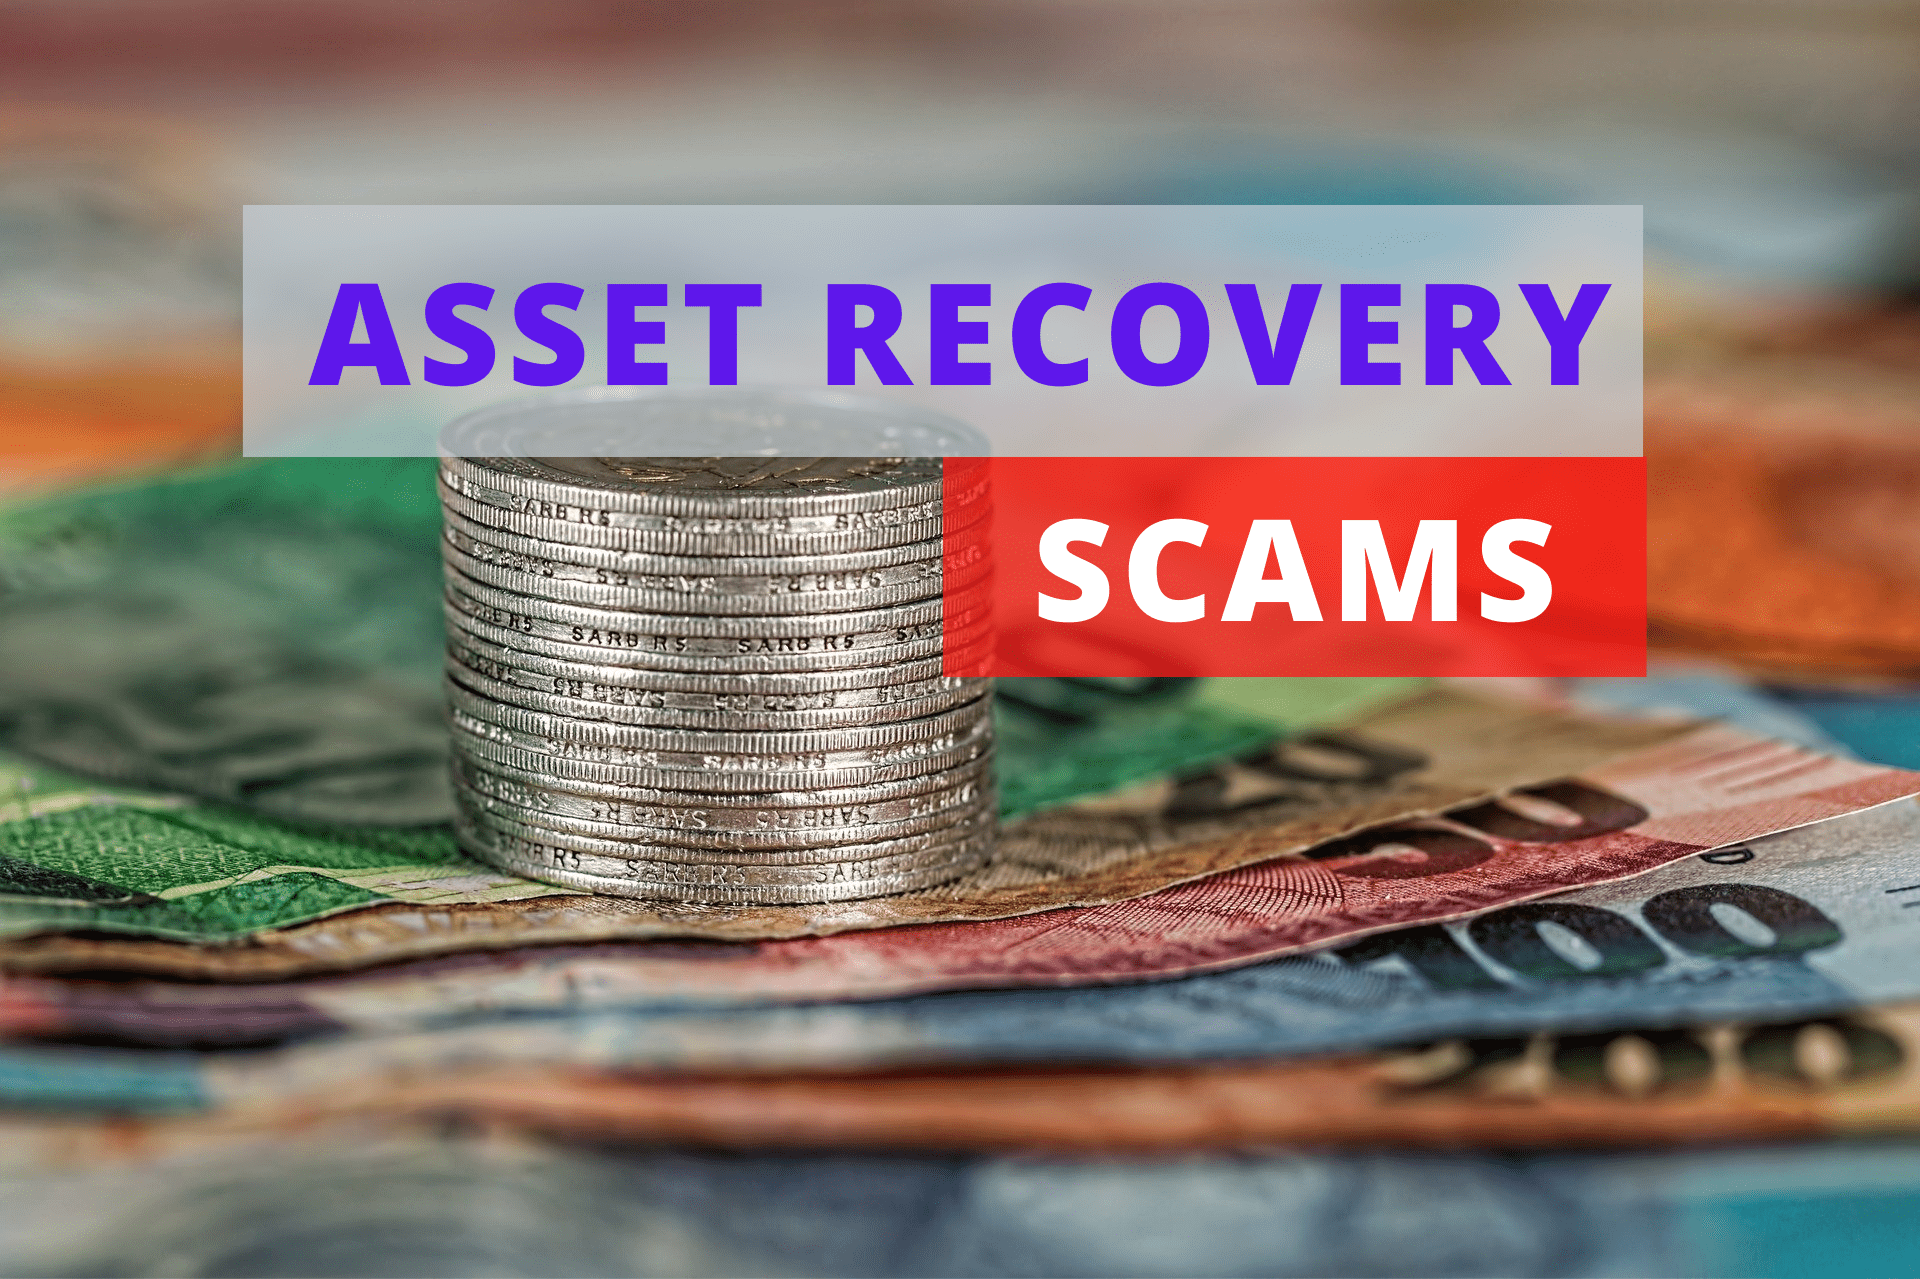 asset recovery scams